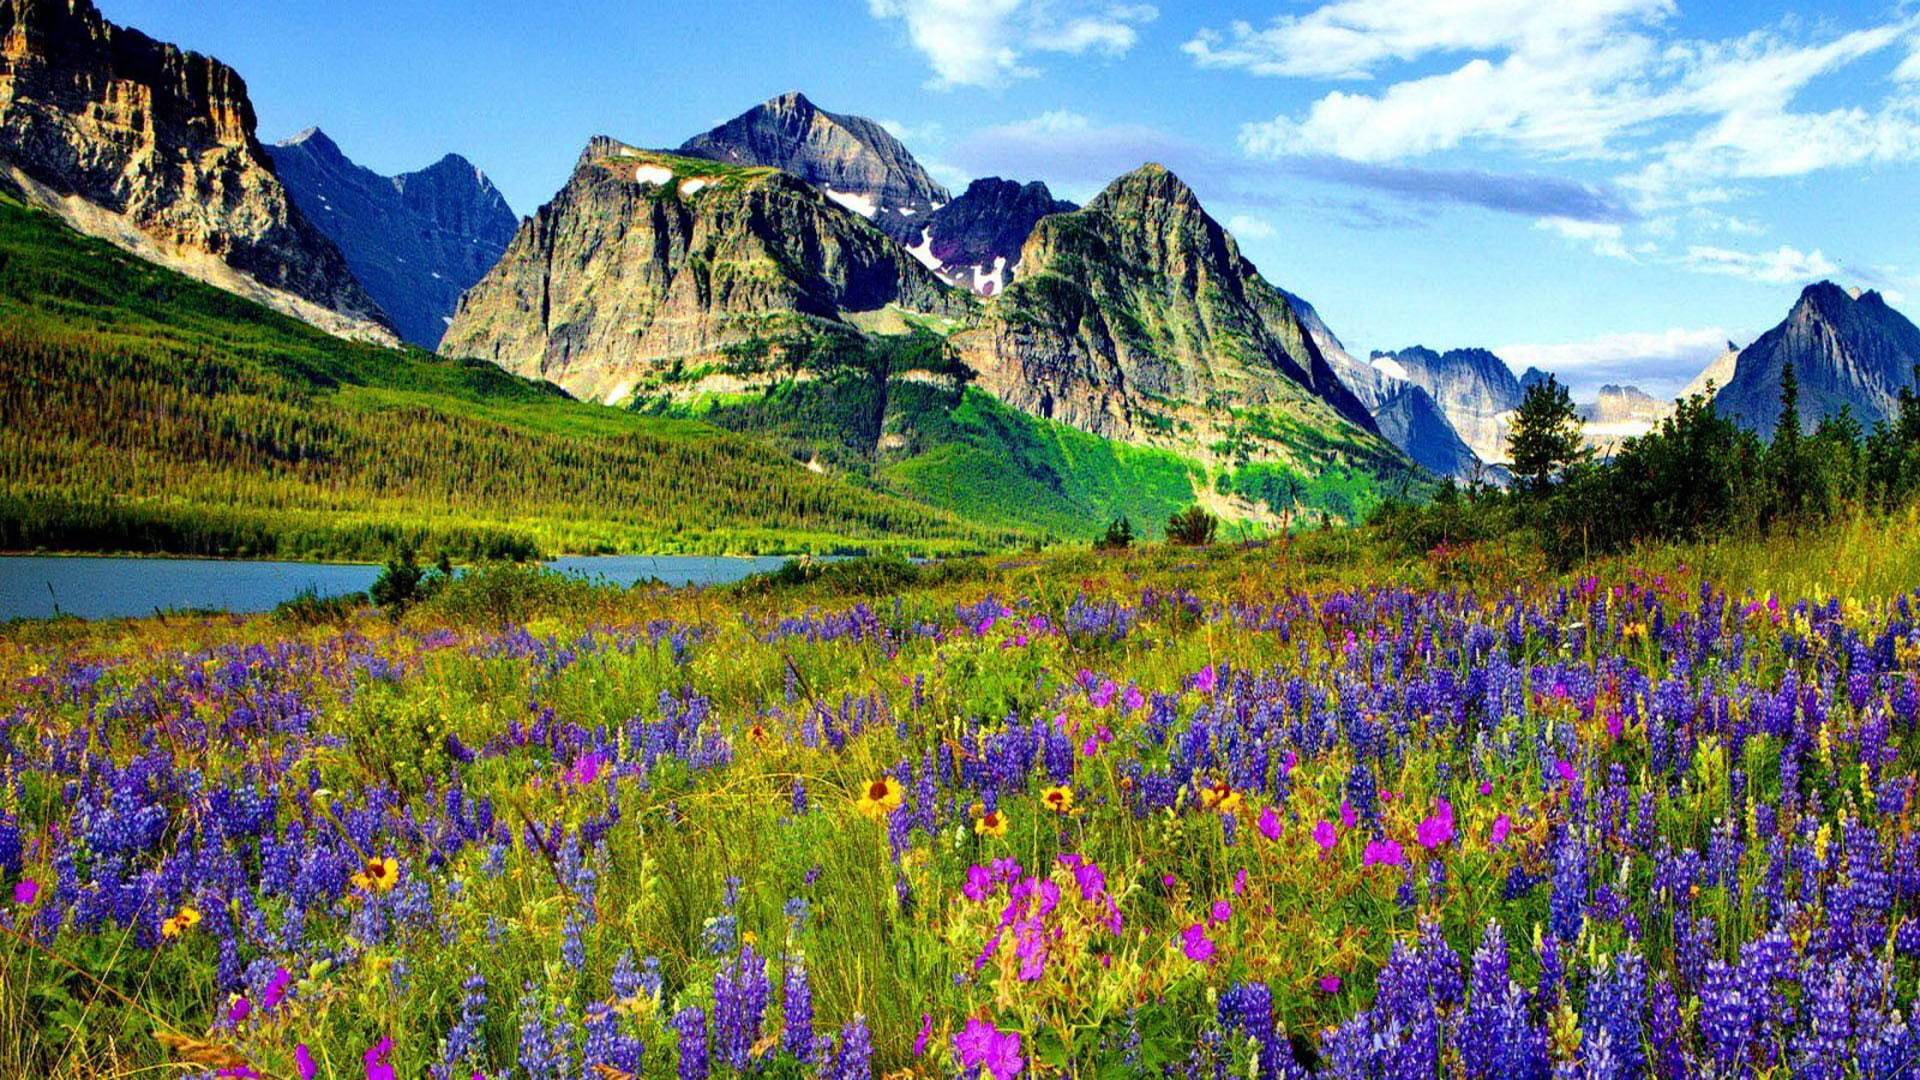 Mountain Flower In Colorado Blue And Purple Flowers Of Lupine River Mountains With Sharp Peaks Pine Forest Blue Sky Spring Landscape 1920×1080